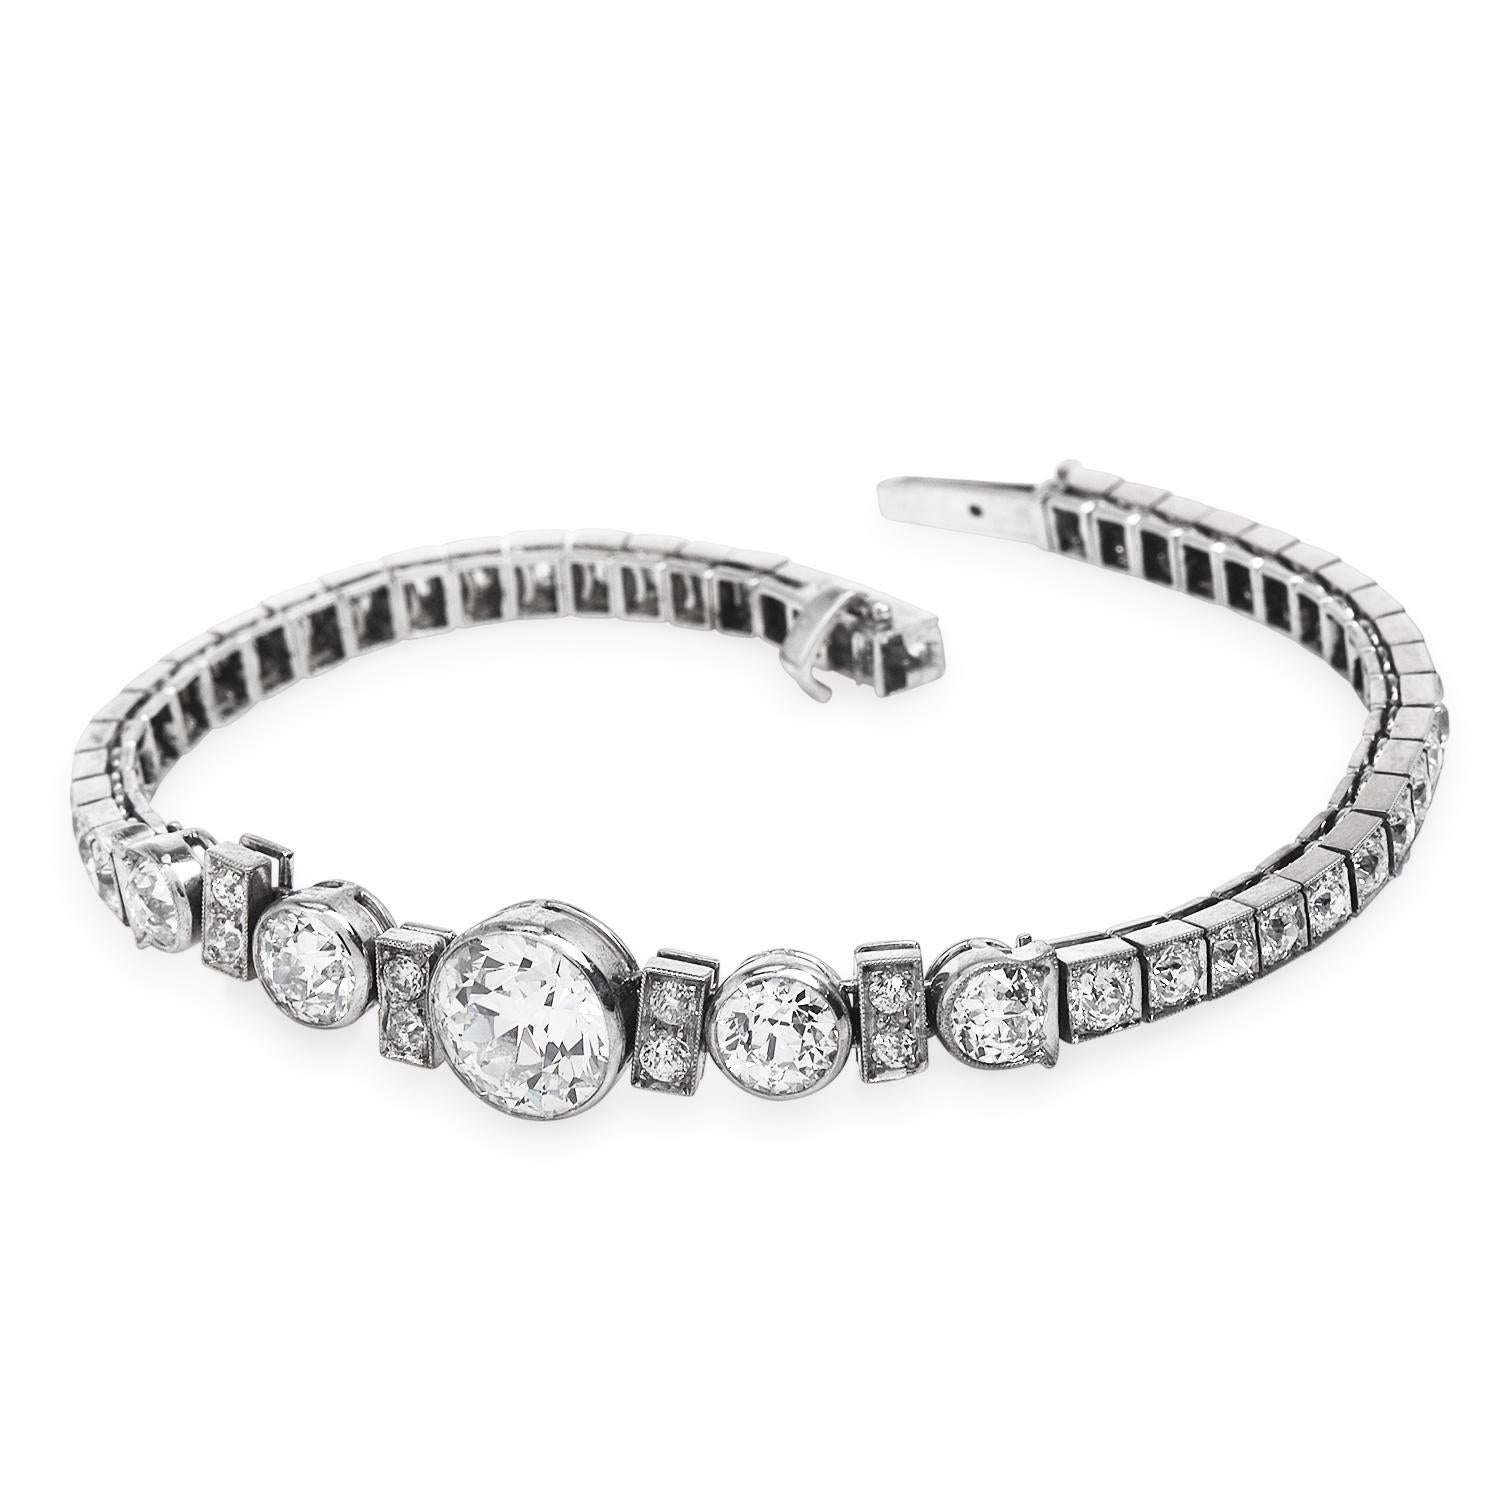 This Stunning Vintage Cartier Line diamond Bracelet is crafted in solid platinum; its center is composed of a round European-cut diamond weighing approximately 2.25 carats, F-G color, VS Clarity set in Bezel.  Four smaller round  European diamonds,